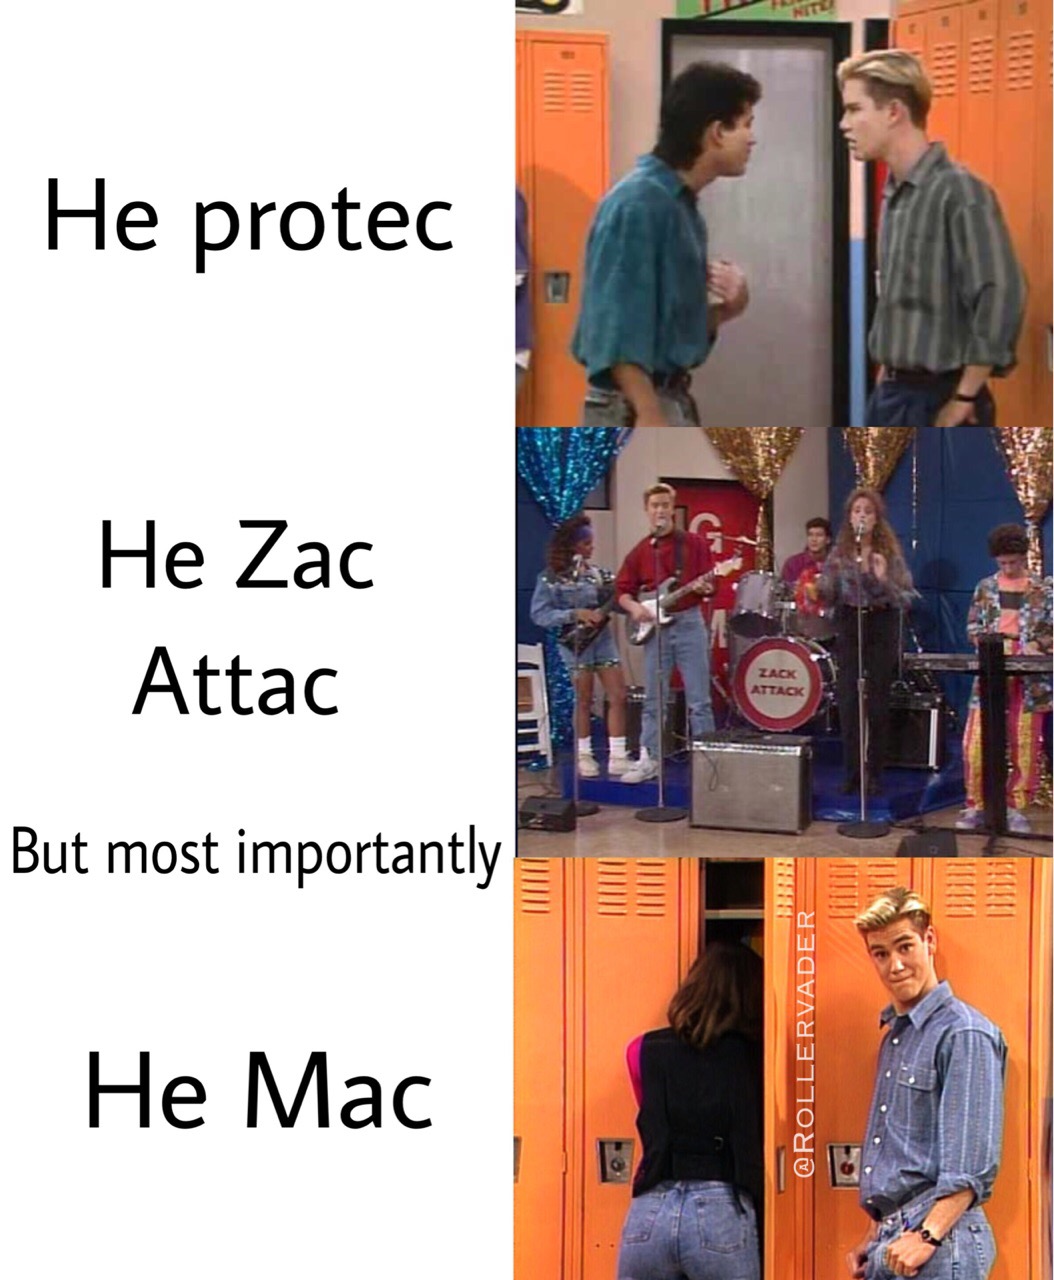 He protec He Zac Attac Attack But most importantly , He Mac